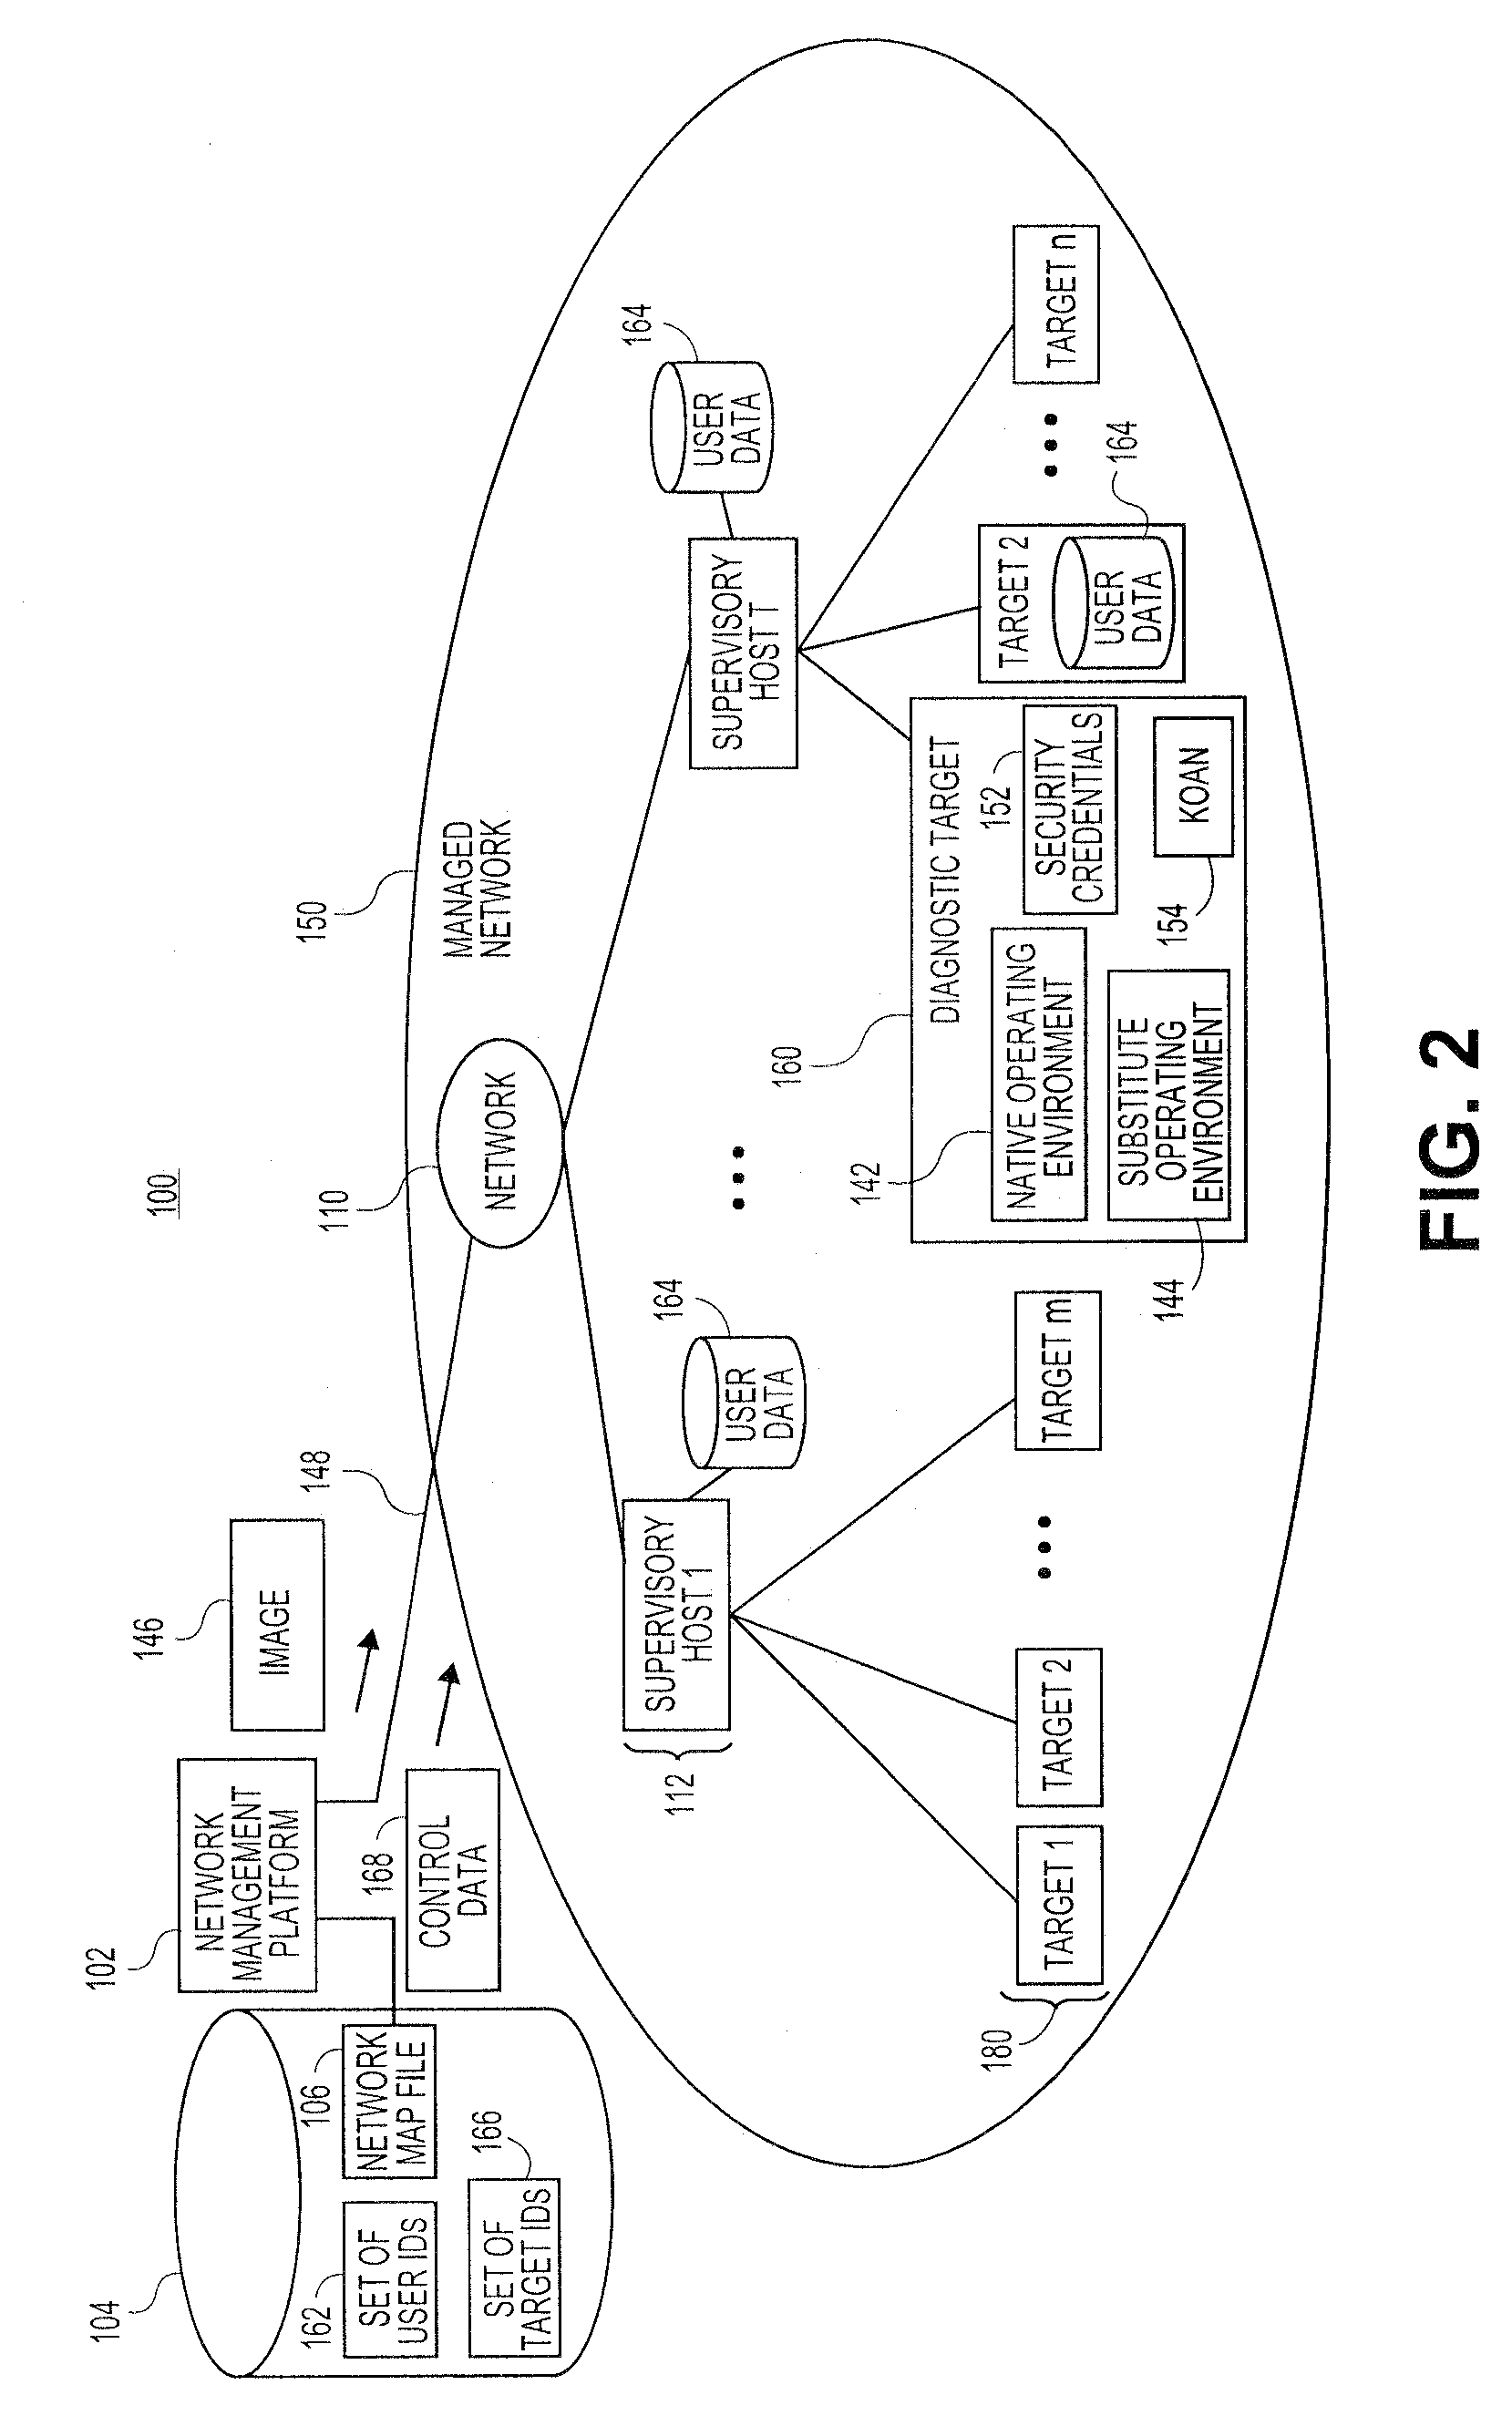 Systems and methods for interrogating diagnostic target using remotely loaded image